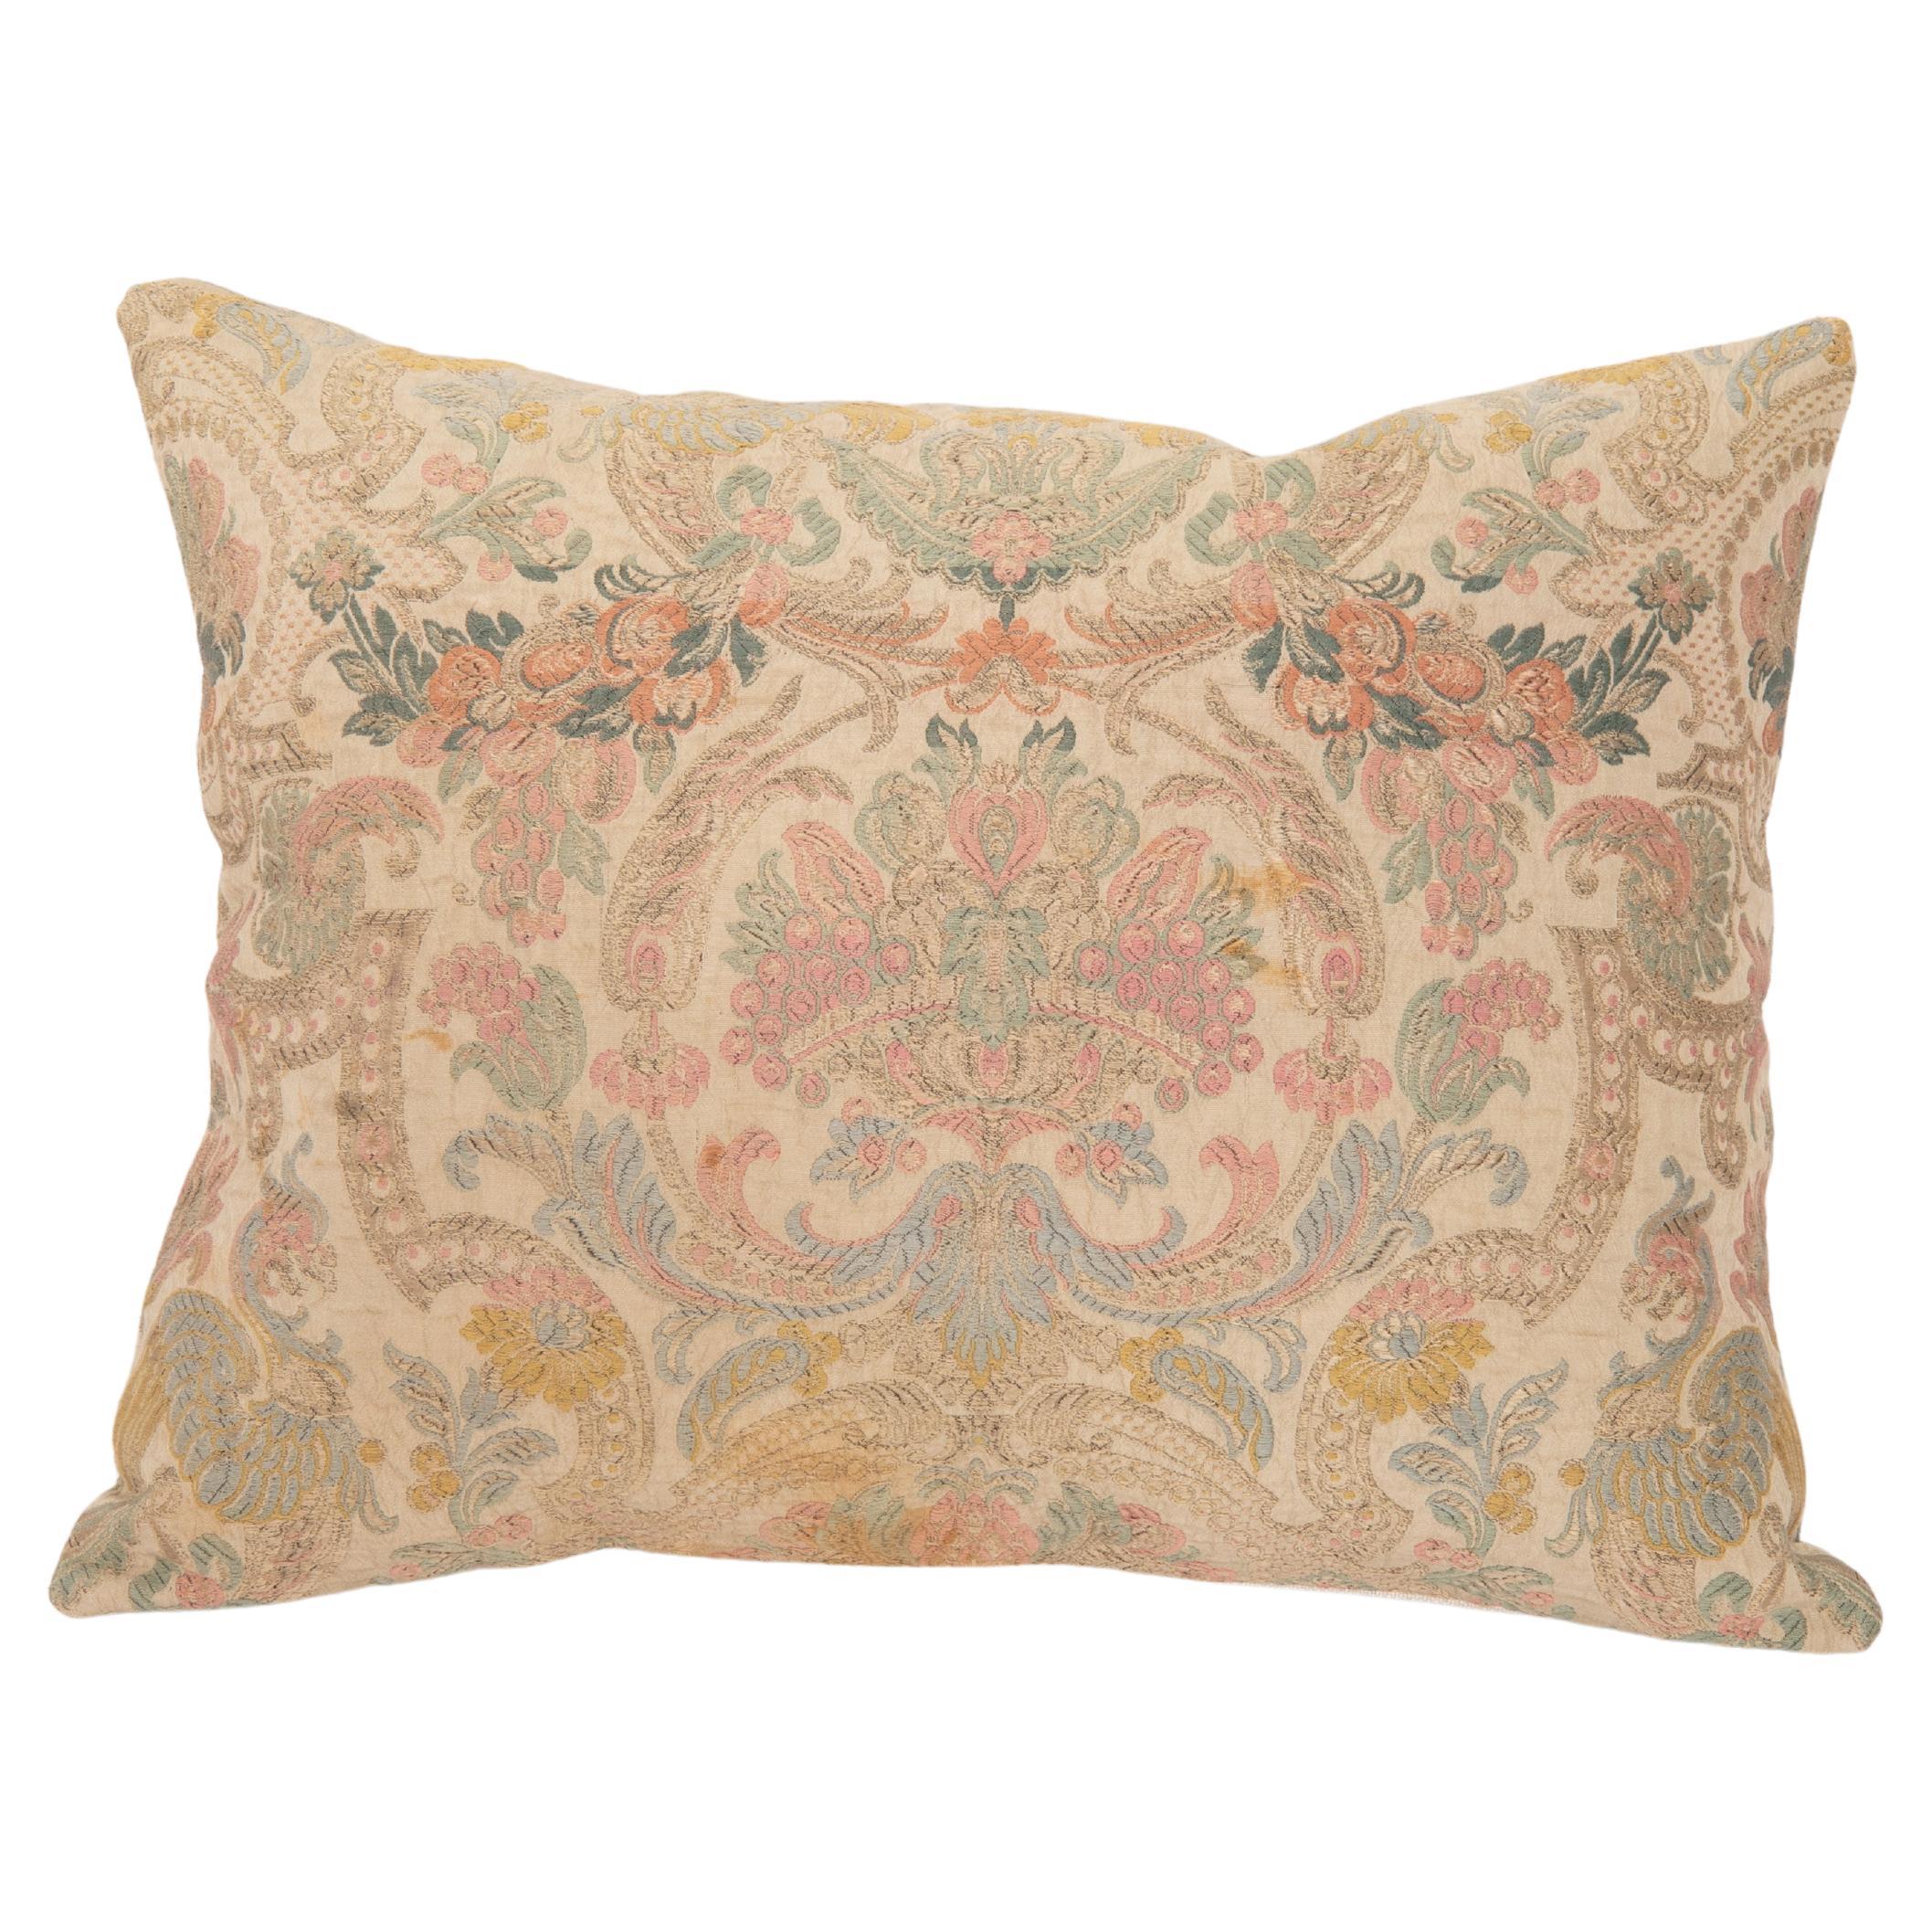 Pillow Cover Made from an Early 20th C. European Textile For Sale